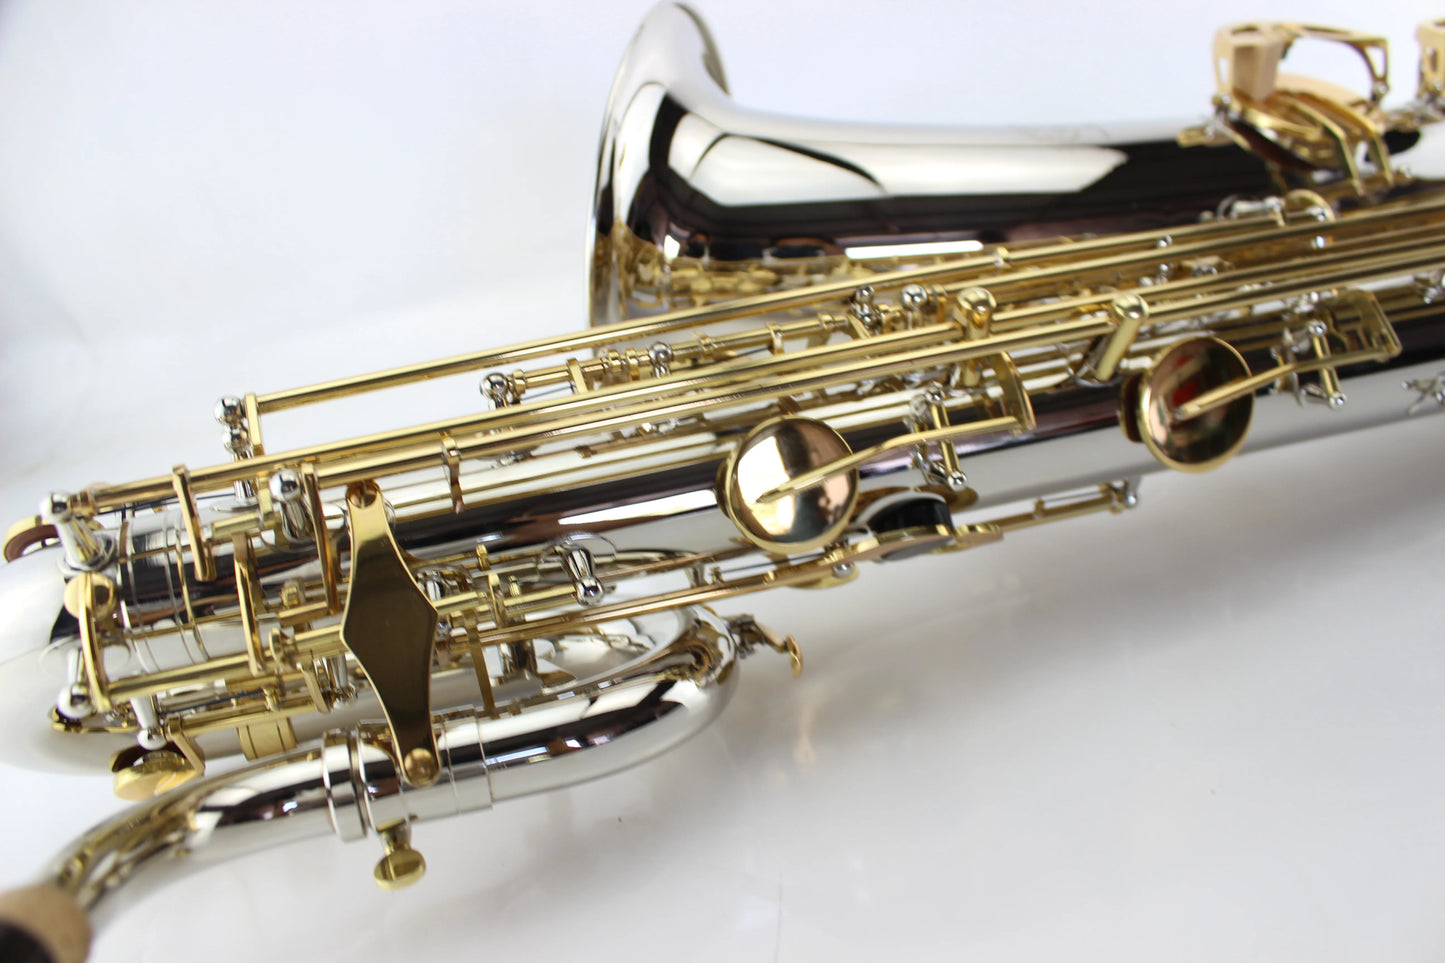 MARGEWATE Eb Baritone Saxophone Brass Nicke Silver Gold Key Bari Sax New Arrival Musical Instrument with Mouthpiece Case